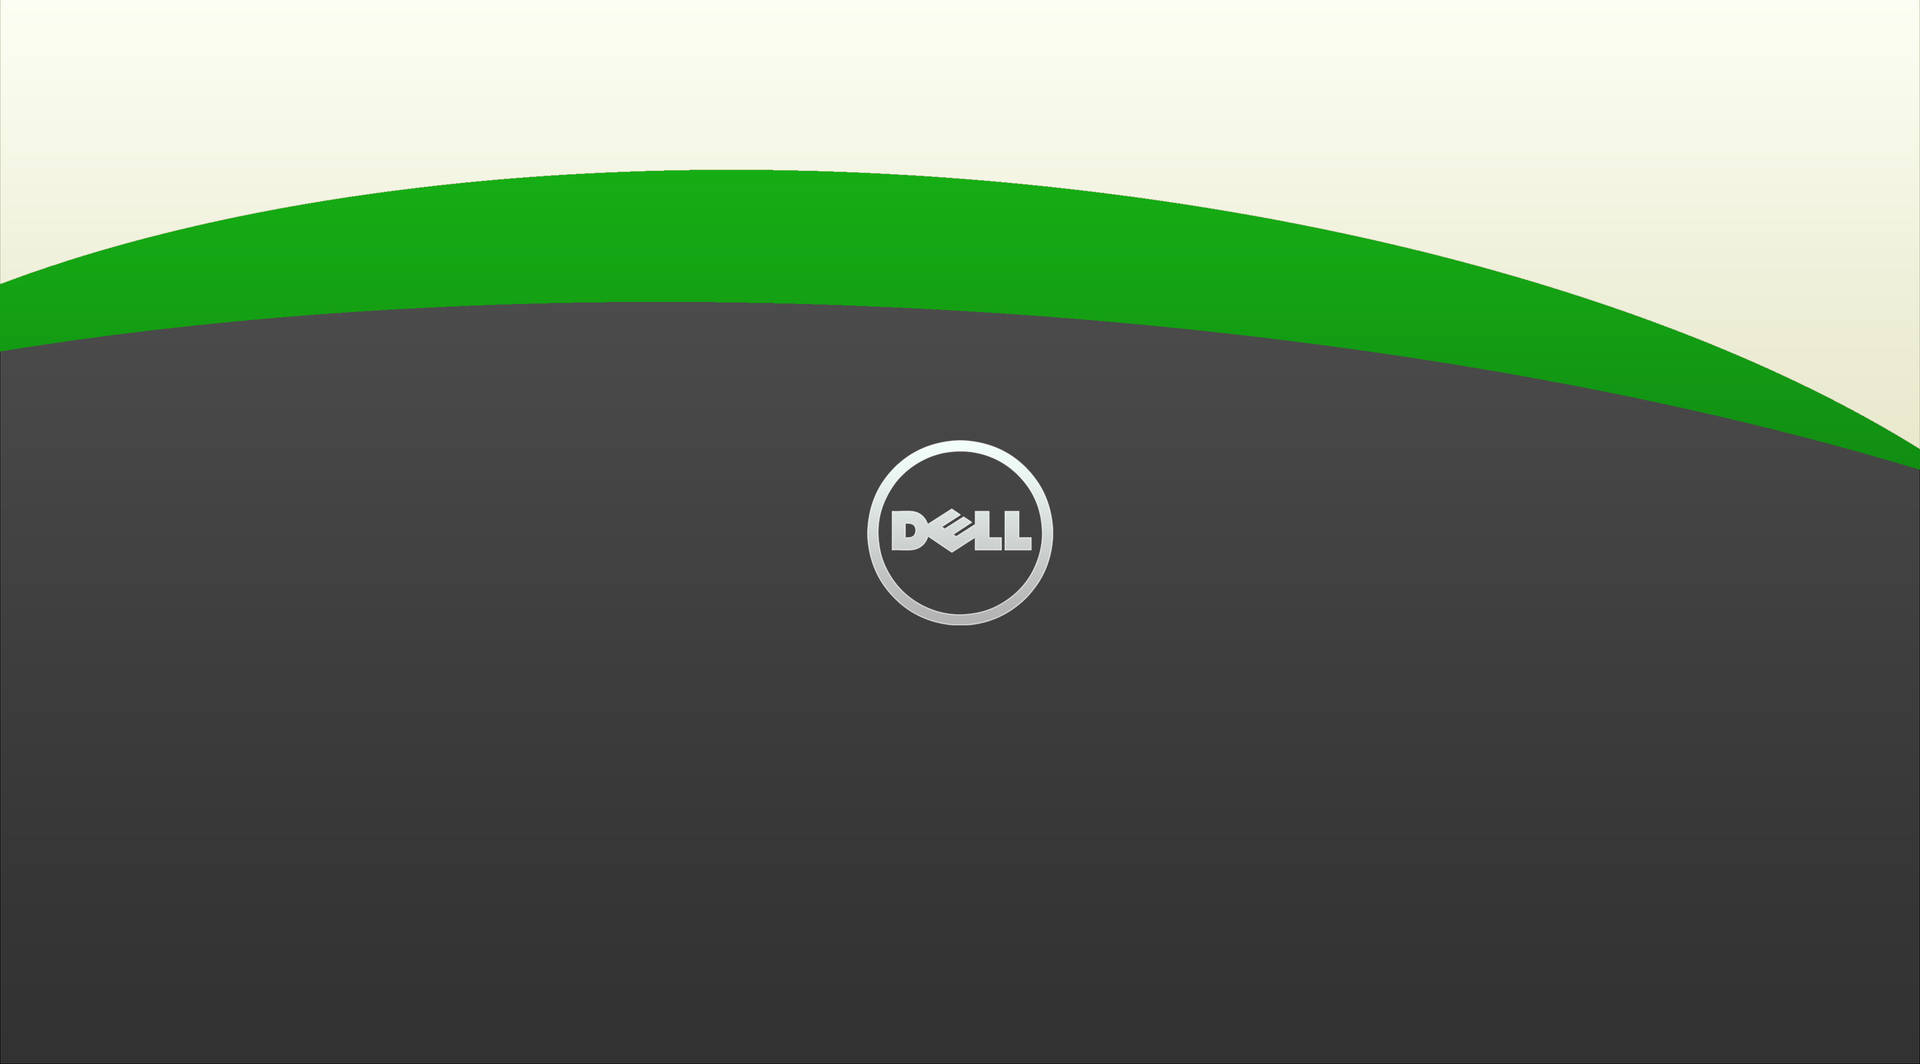 Dell 4k Gray And Green